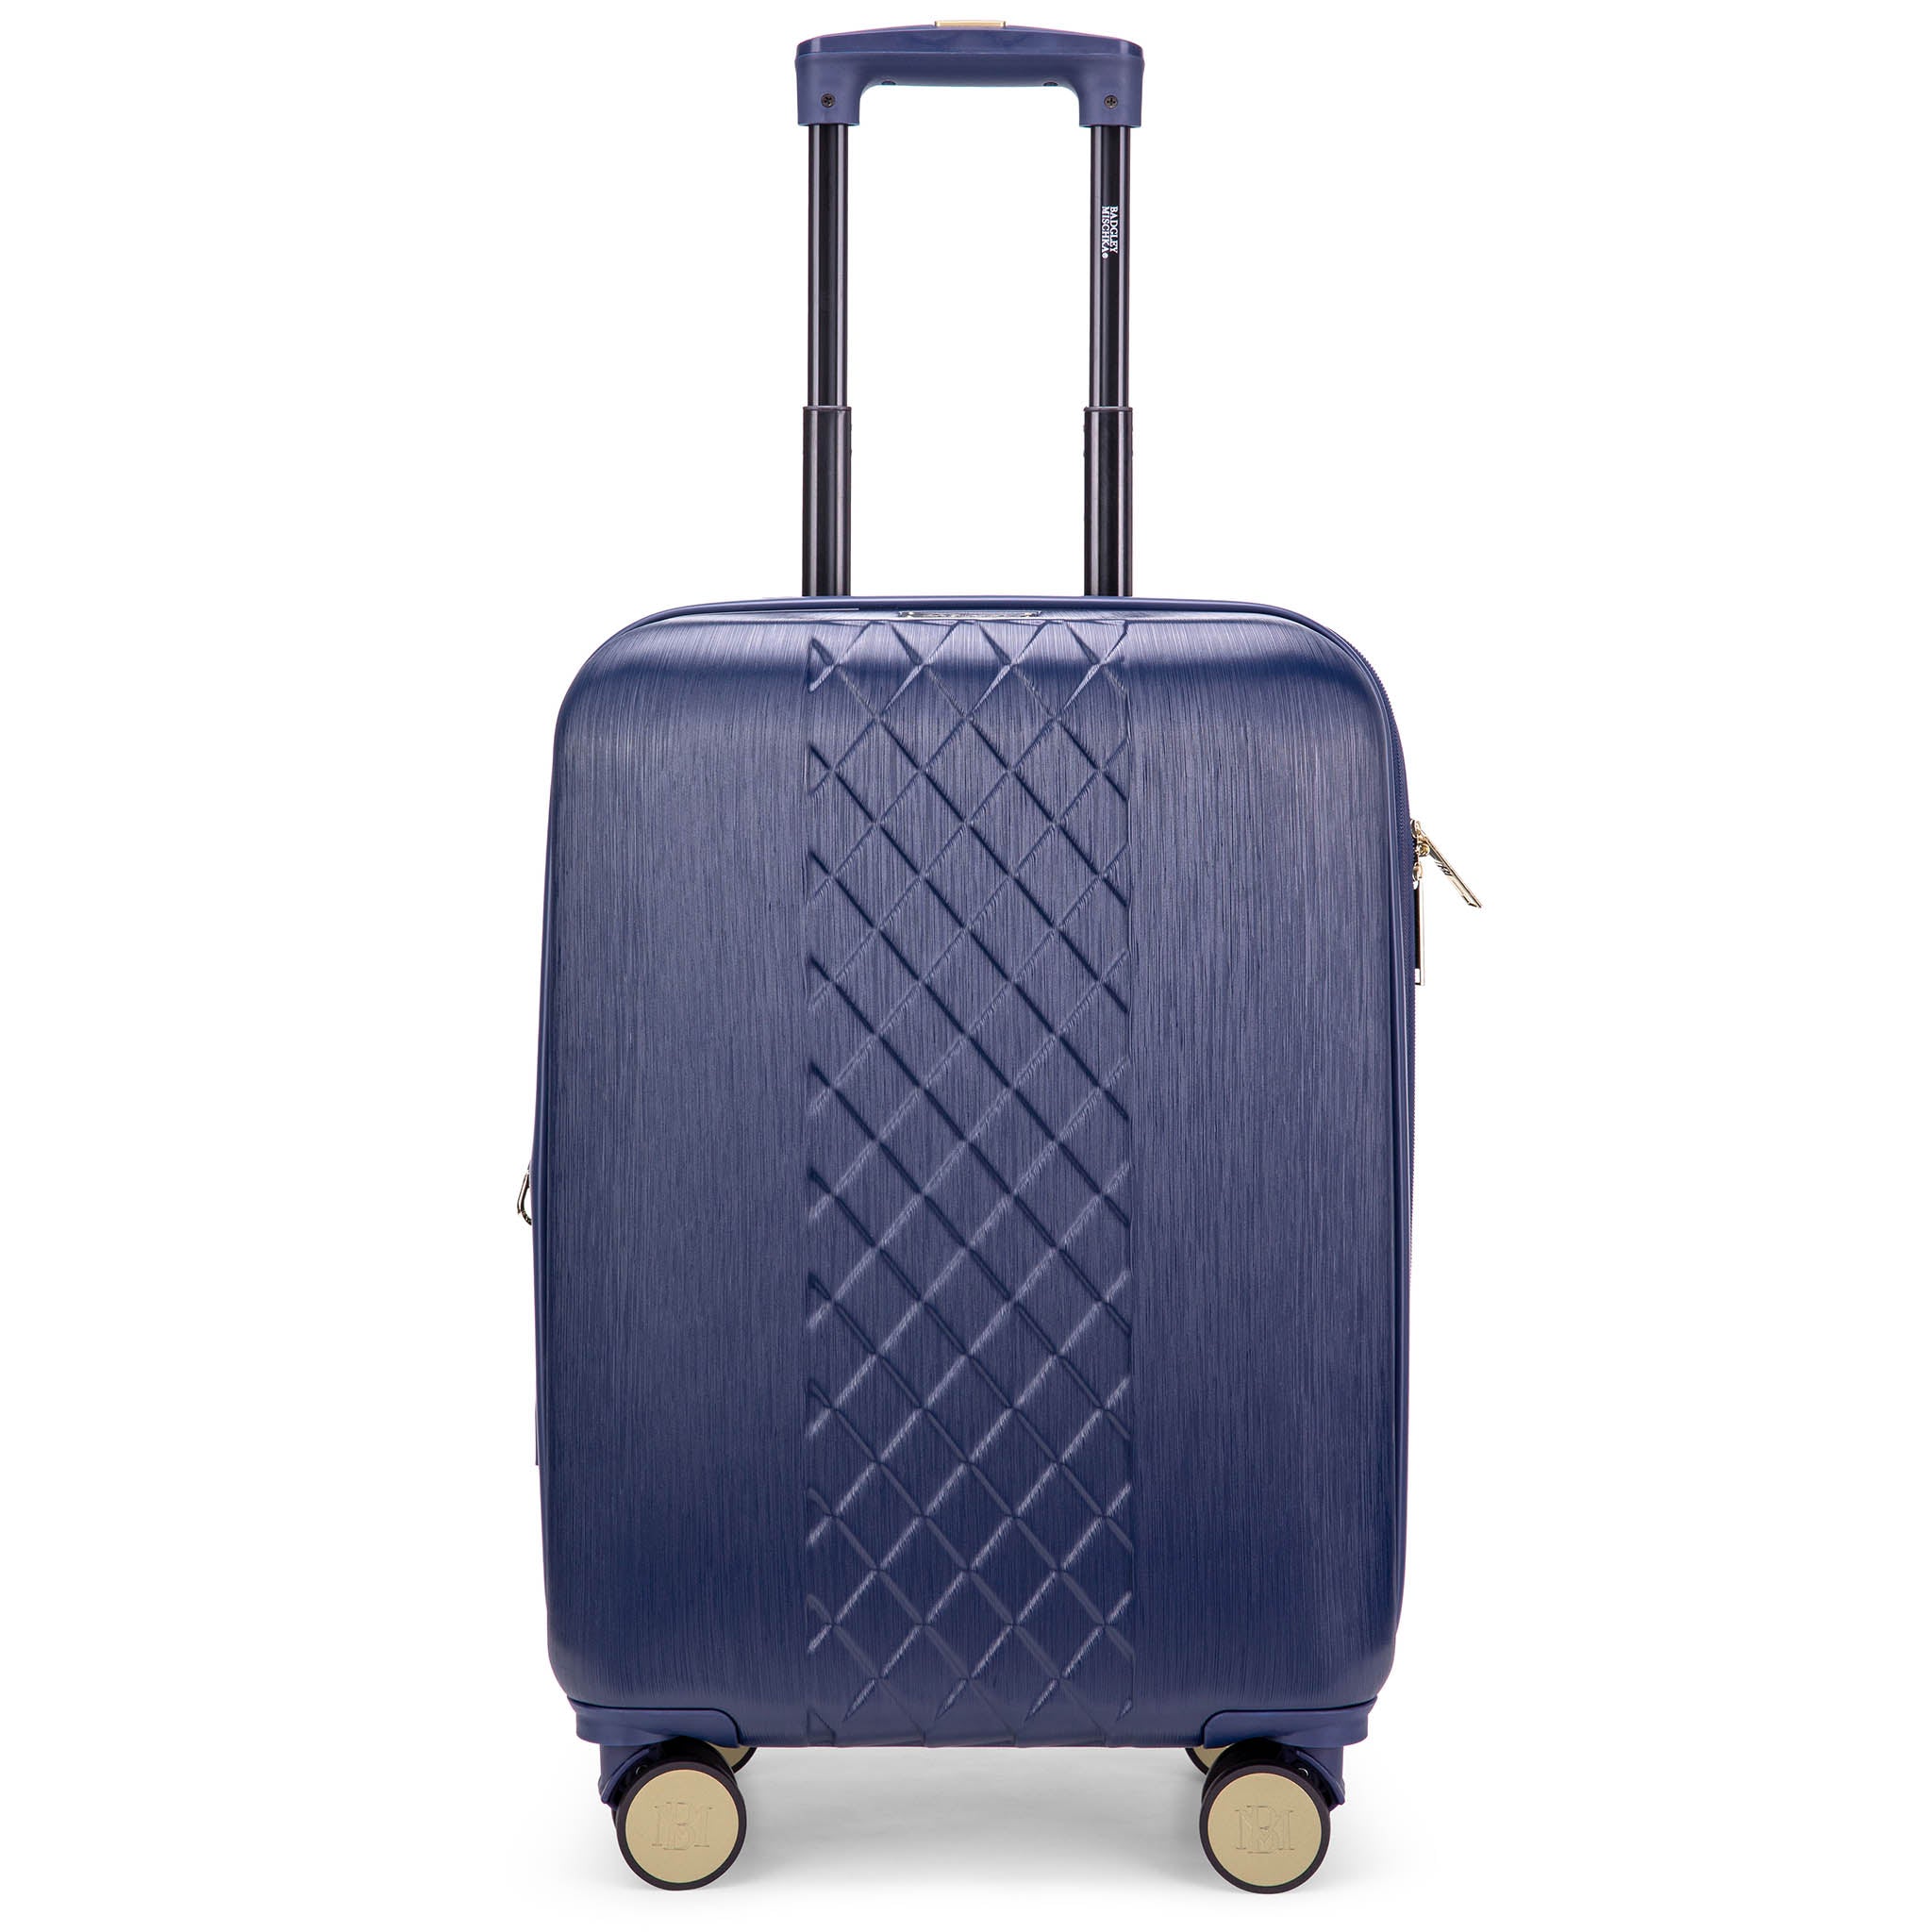 Diamond 20" Expandable Carry-on Suitcase